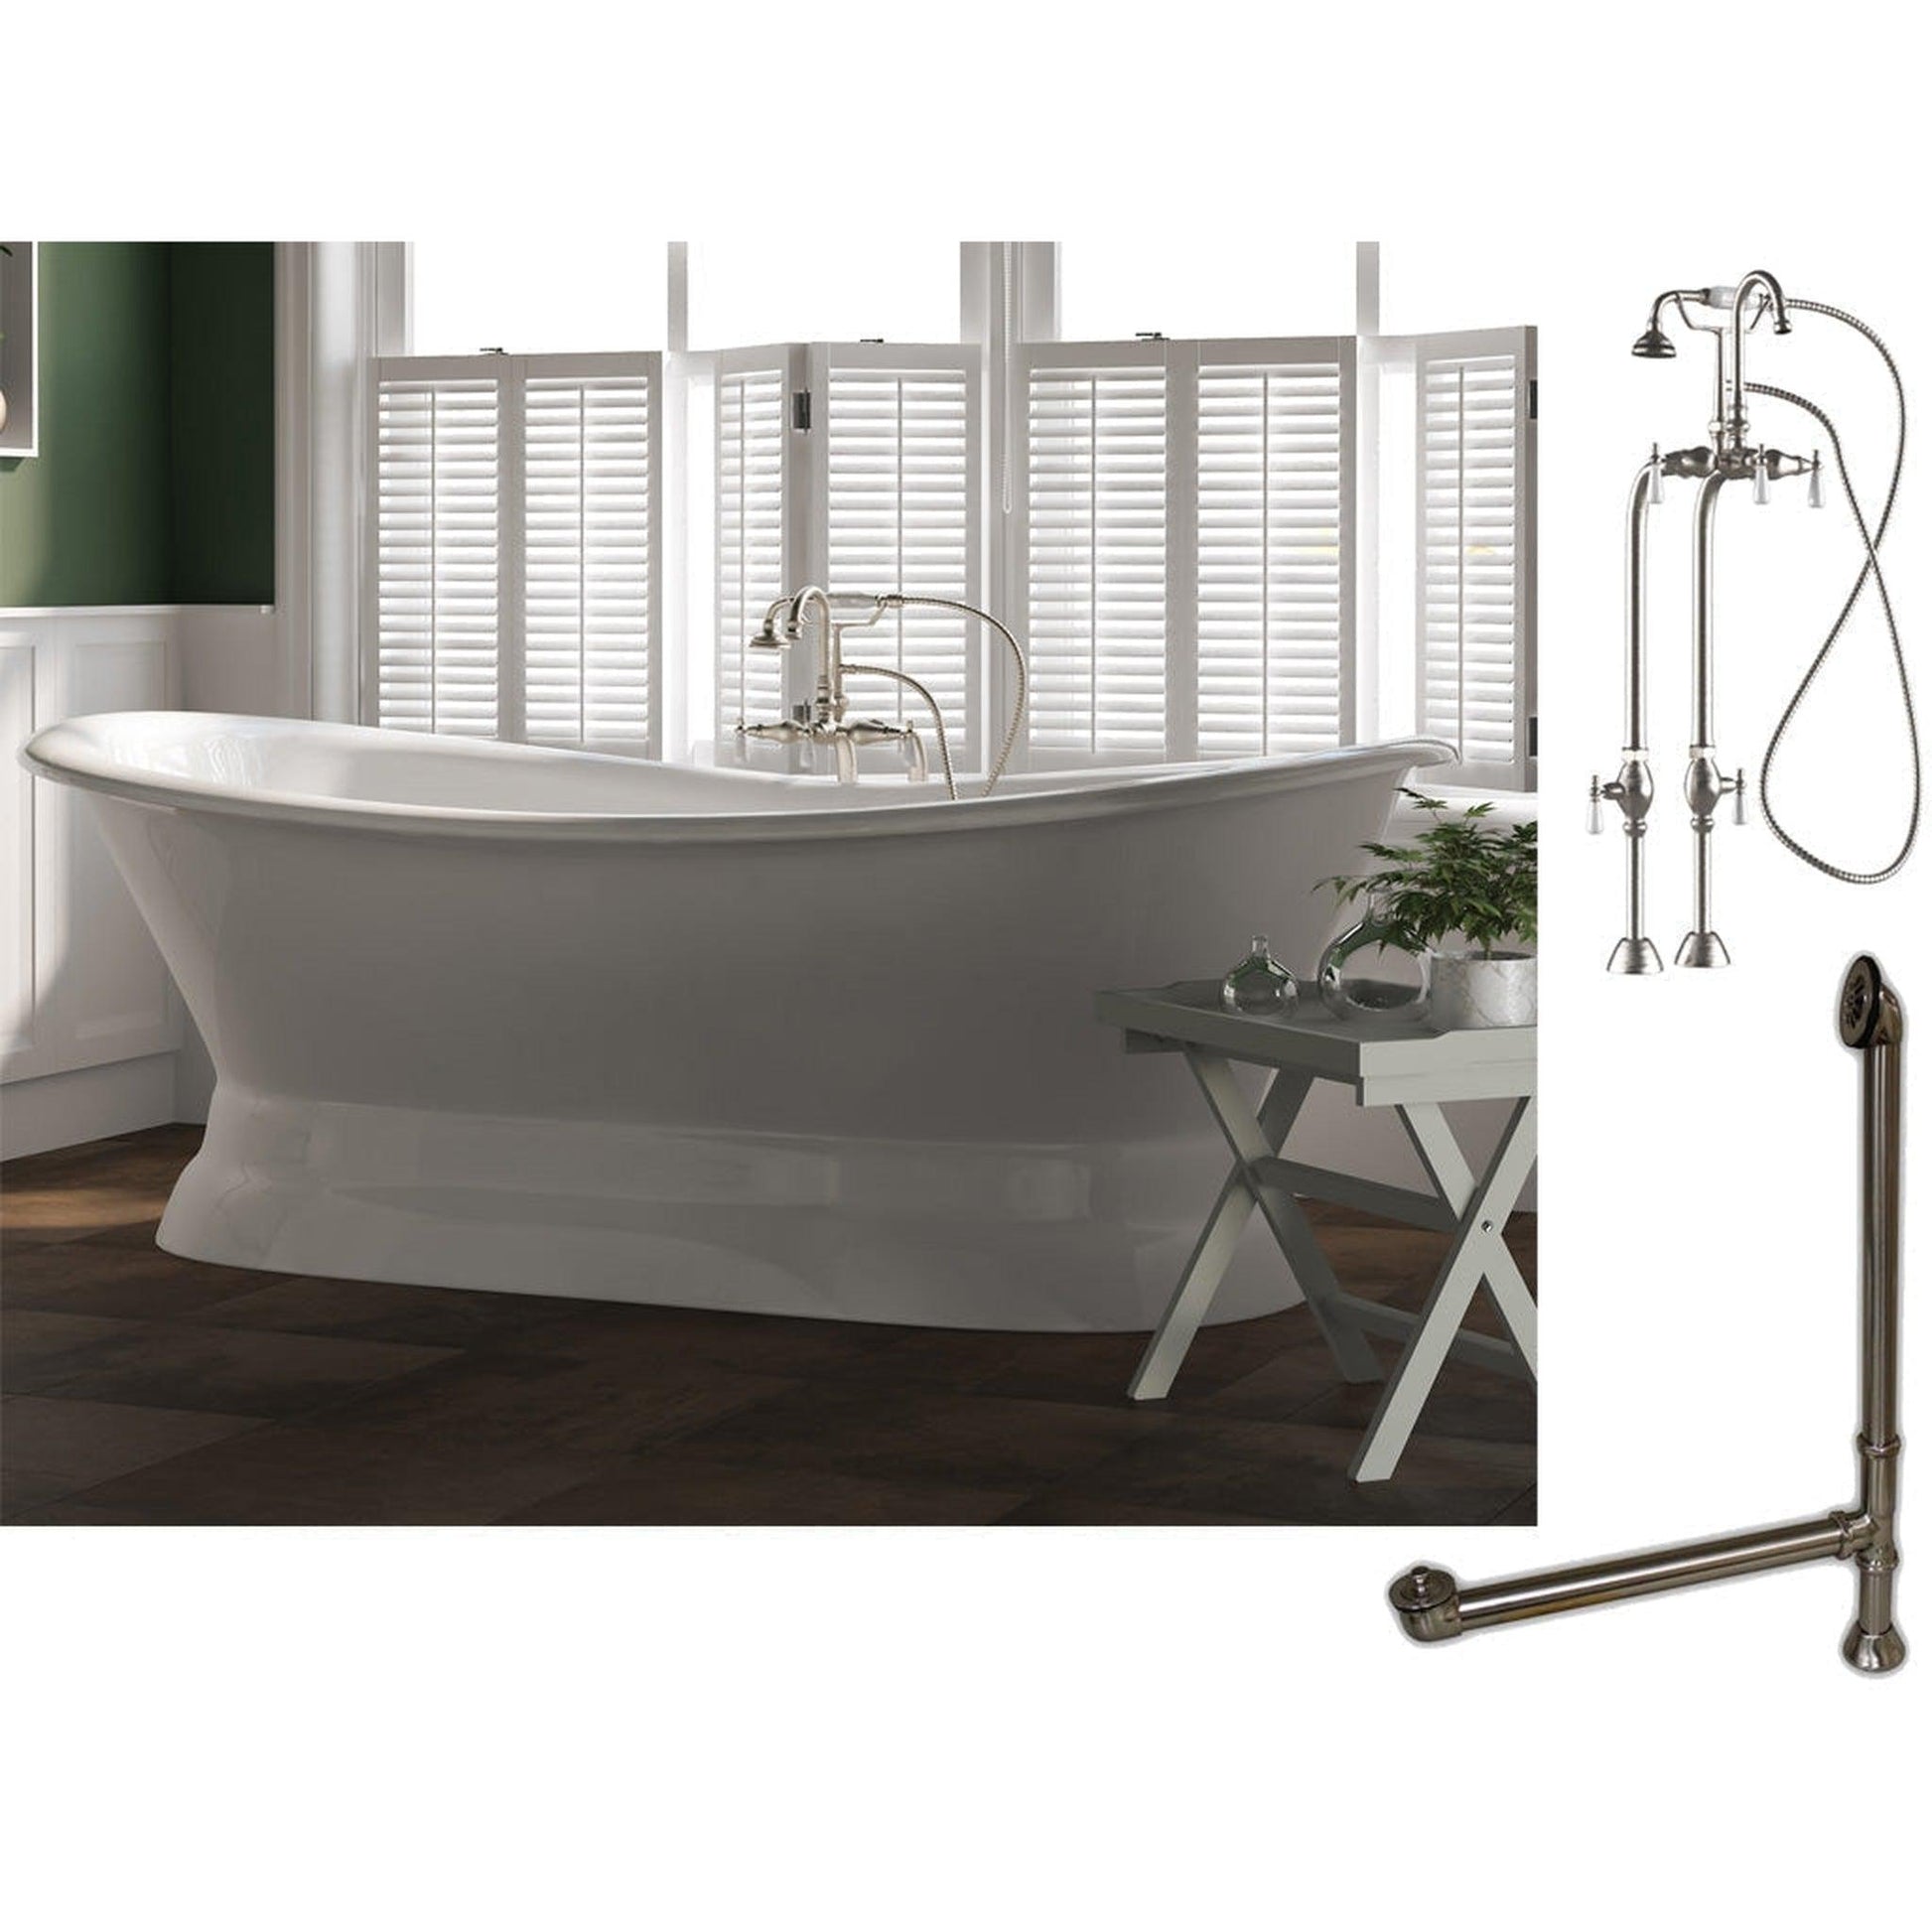 Cambridge Plumbing 71" White Cast Iron Double Slipper Pedestal Bathtub With No Faucet Holes And Complete Plumbing Package Including Freestanding English Telephone Gooseneck Faucet, Drain And Overflow Assembly In Brushed Nickel